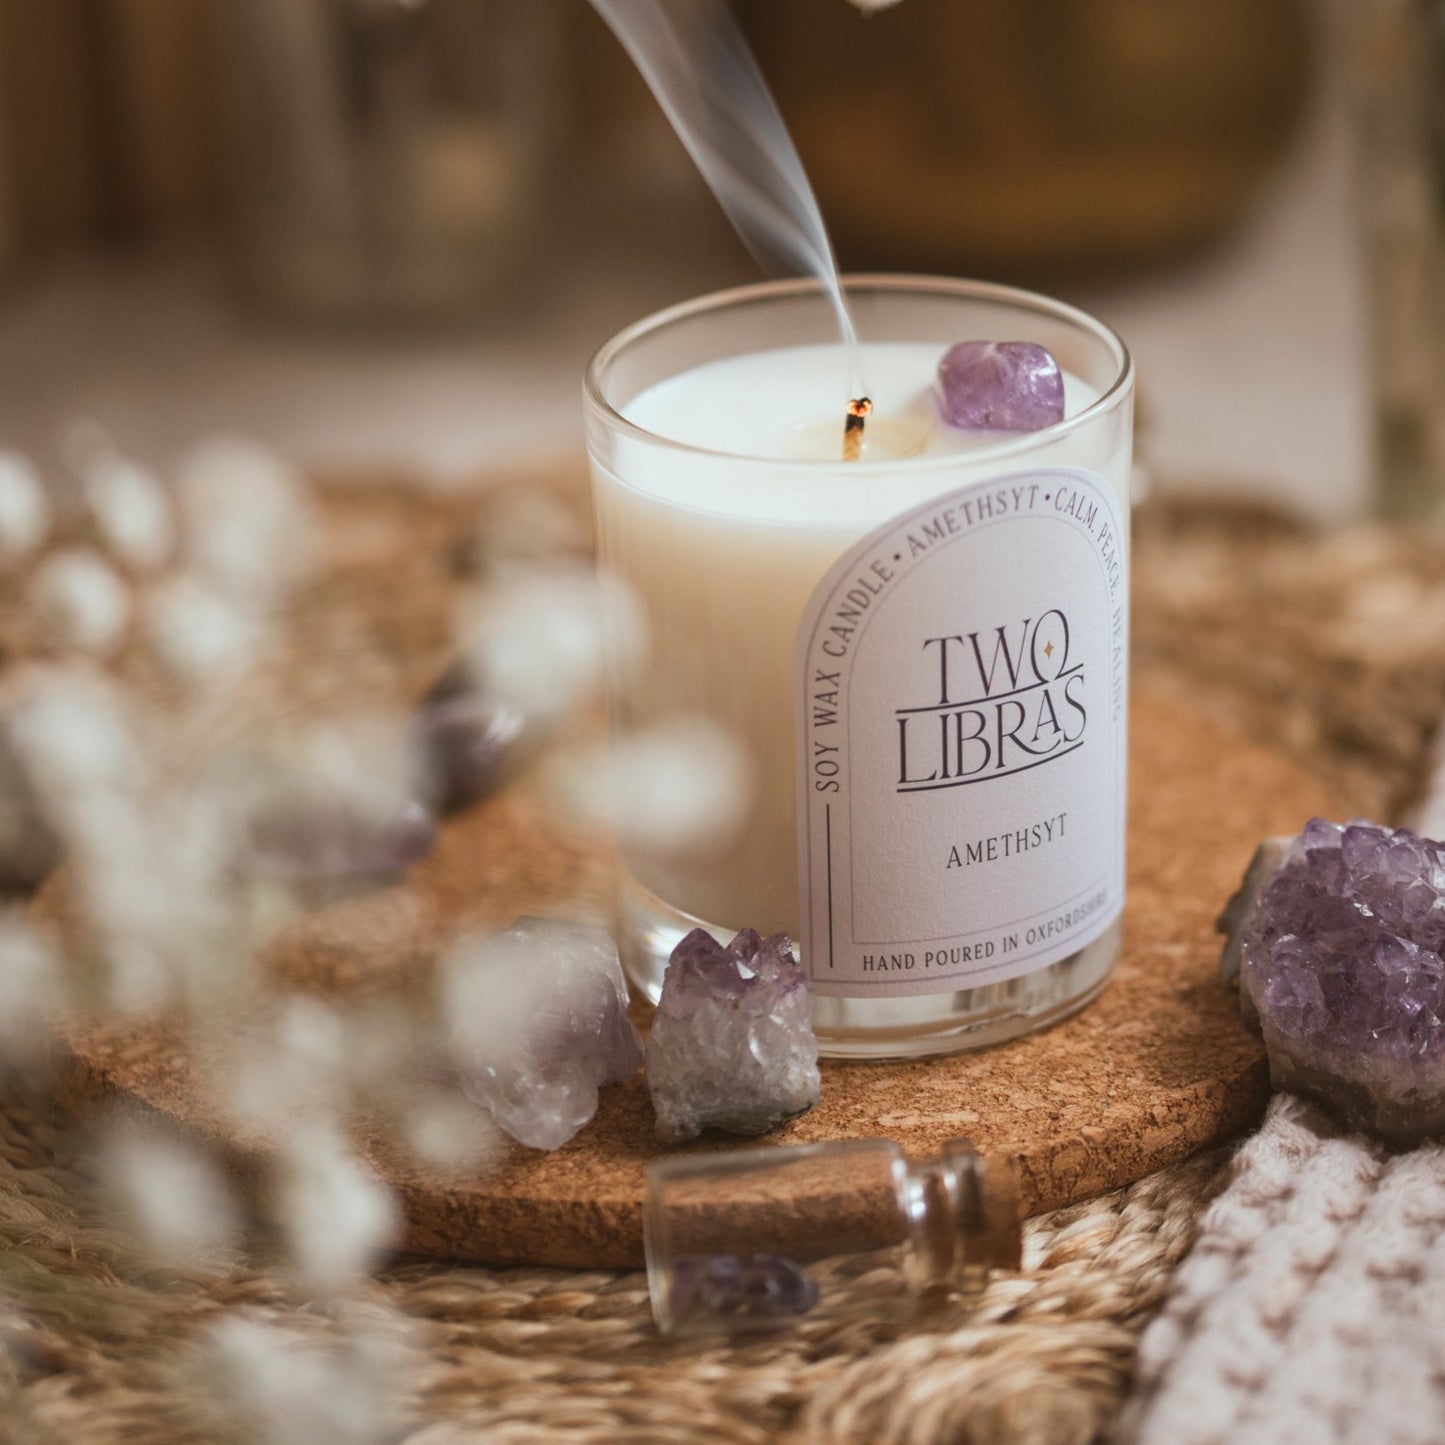 Amethyst Crystal Intention Candle - Calm, Peace, Healing